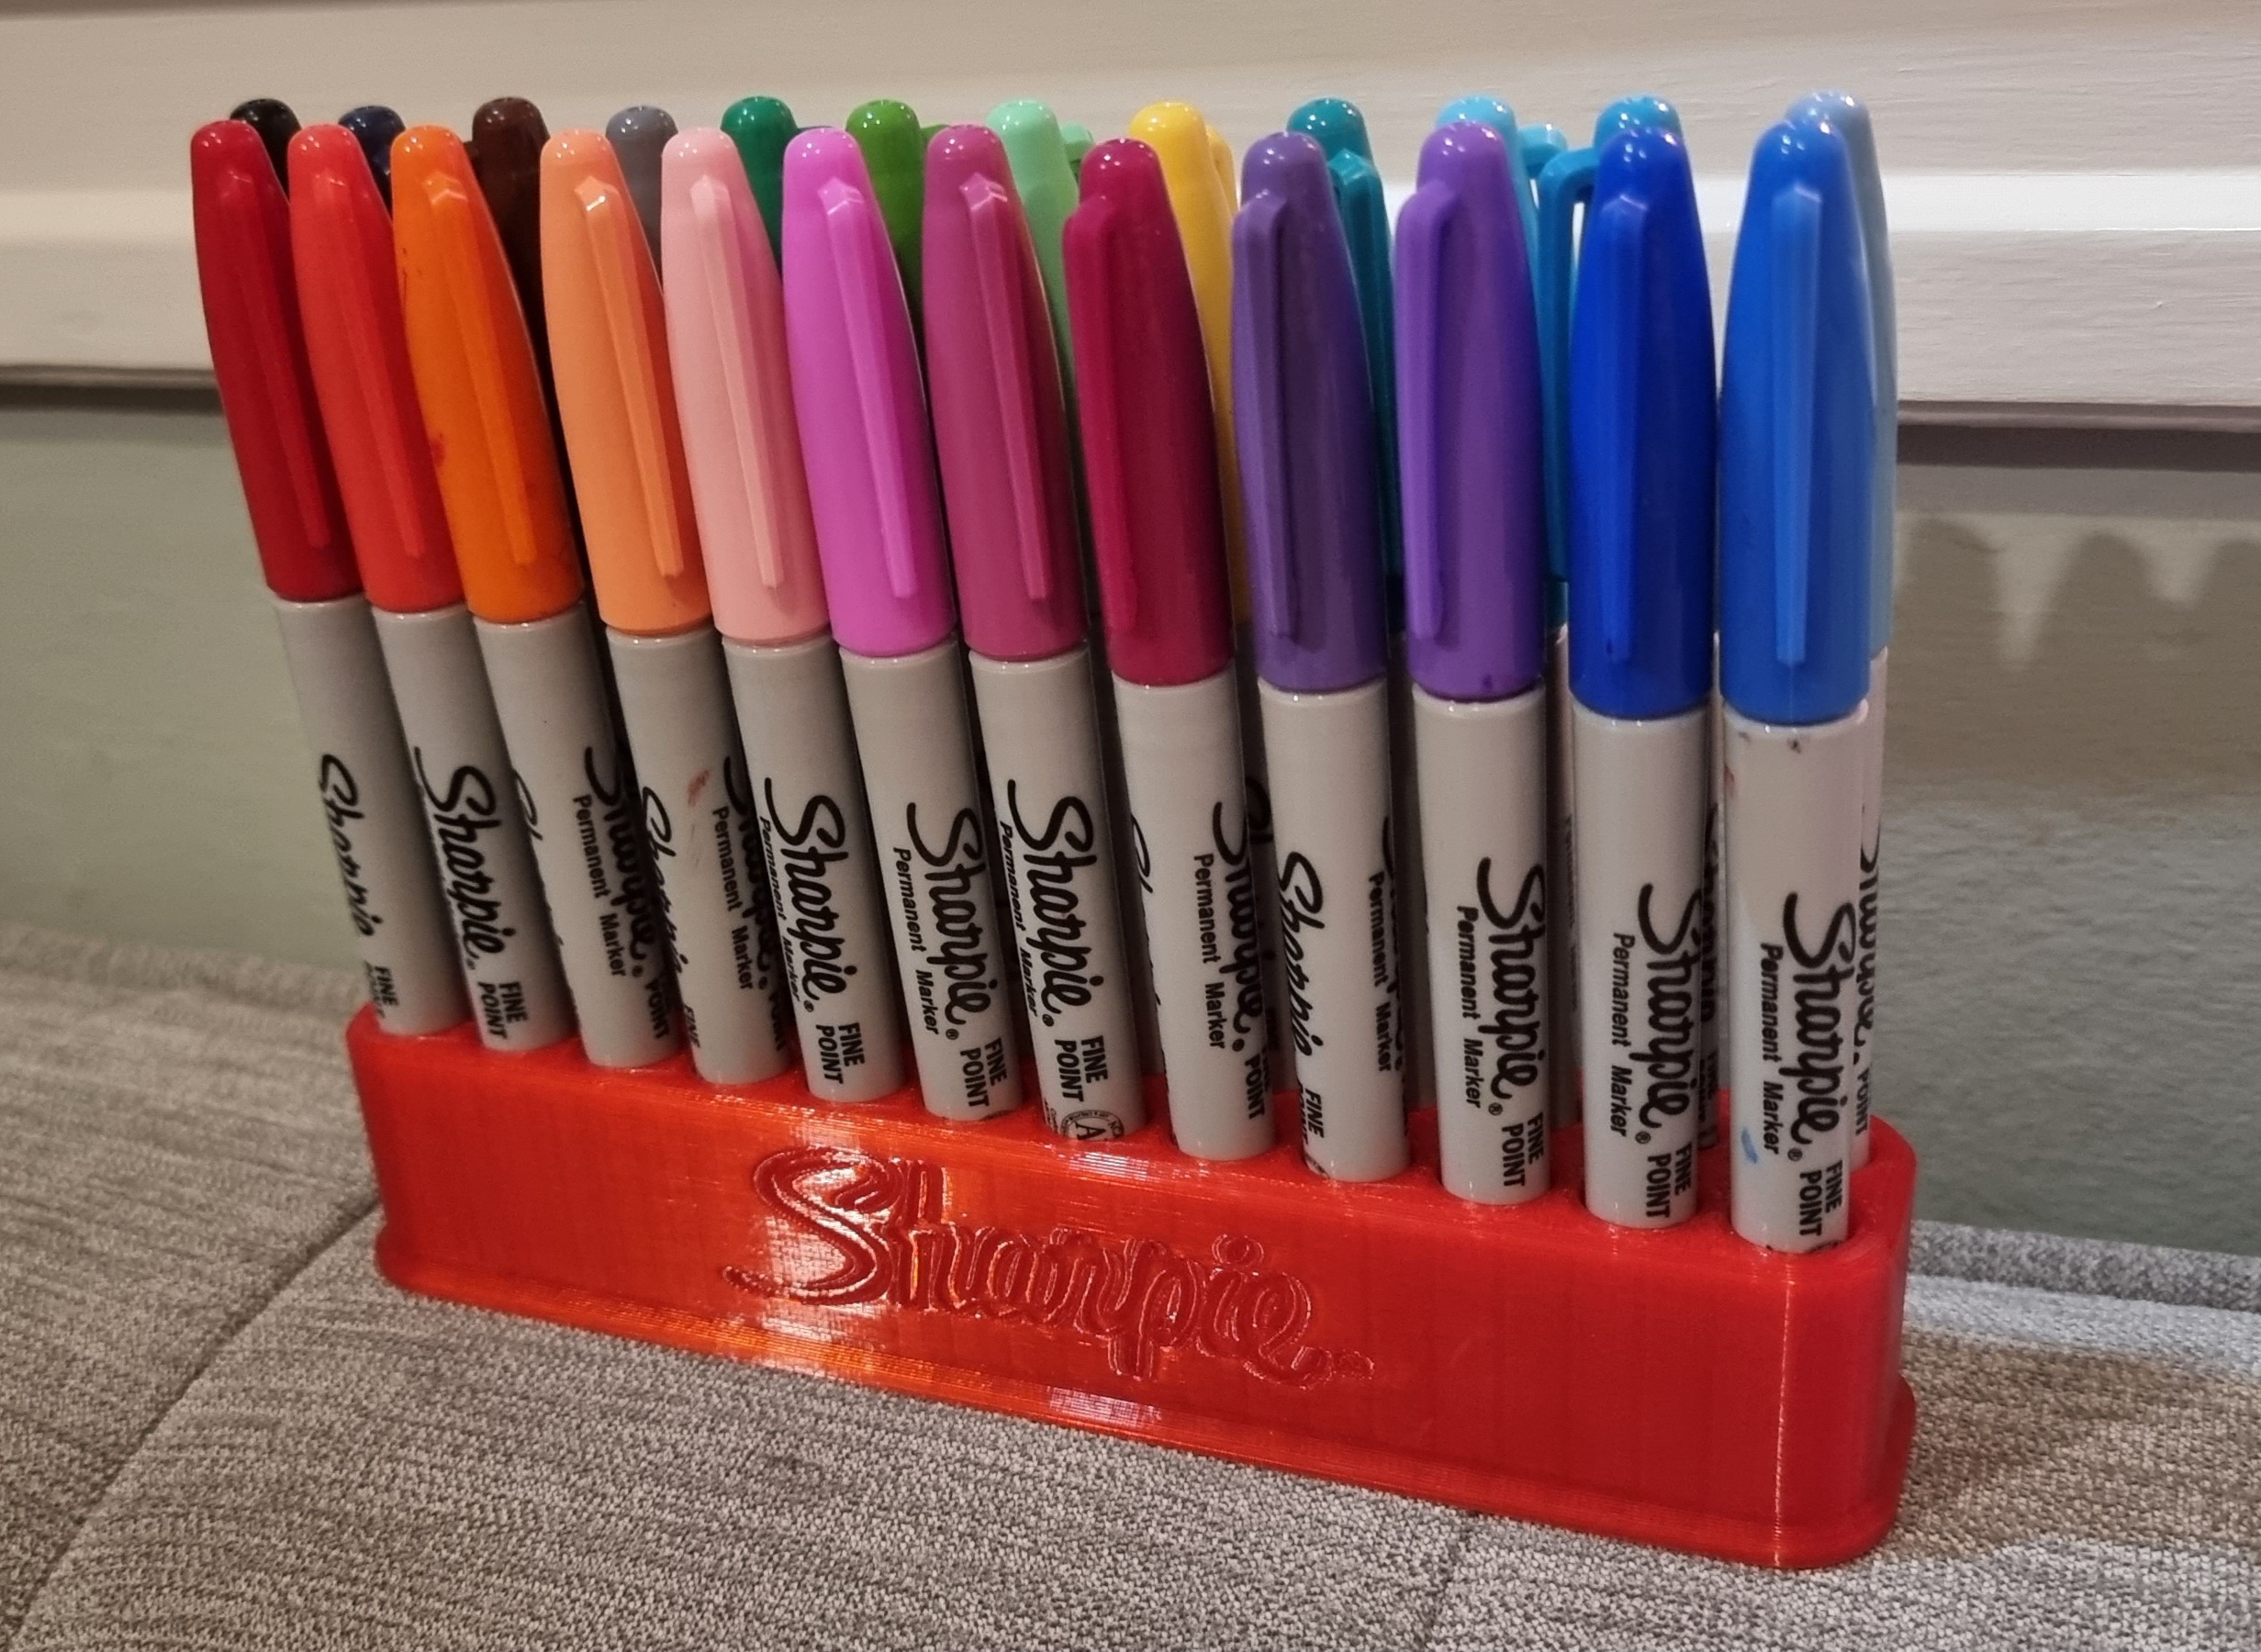 Gridfinity Sharpie Holders - 3D model by bigbrisco on Thangs